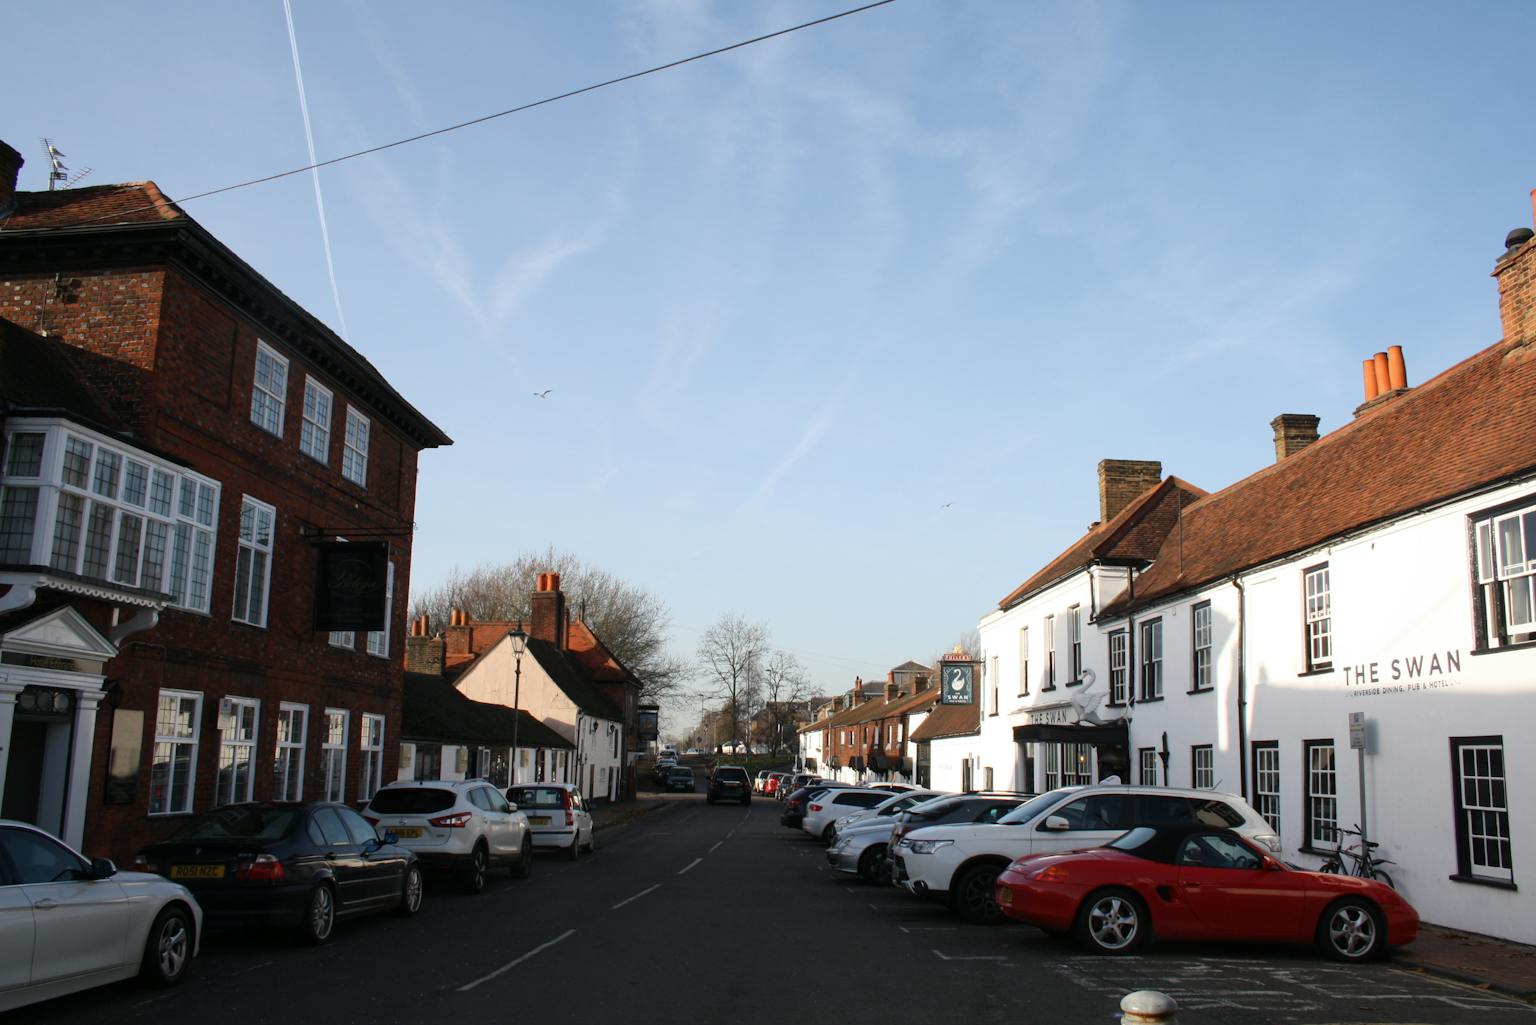 The Hythe, the principal street within the compact Egham Hythe Conservation Area